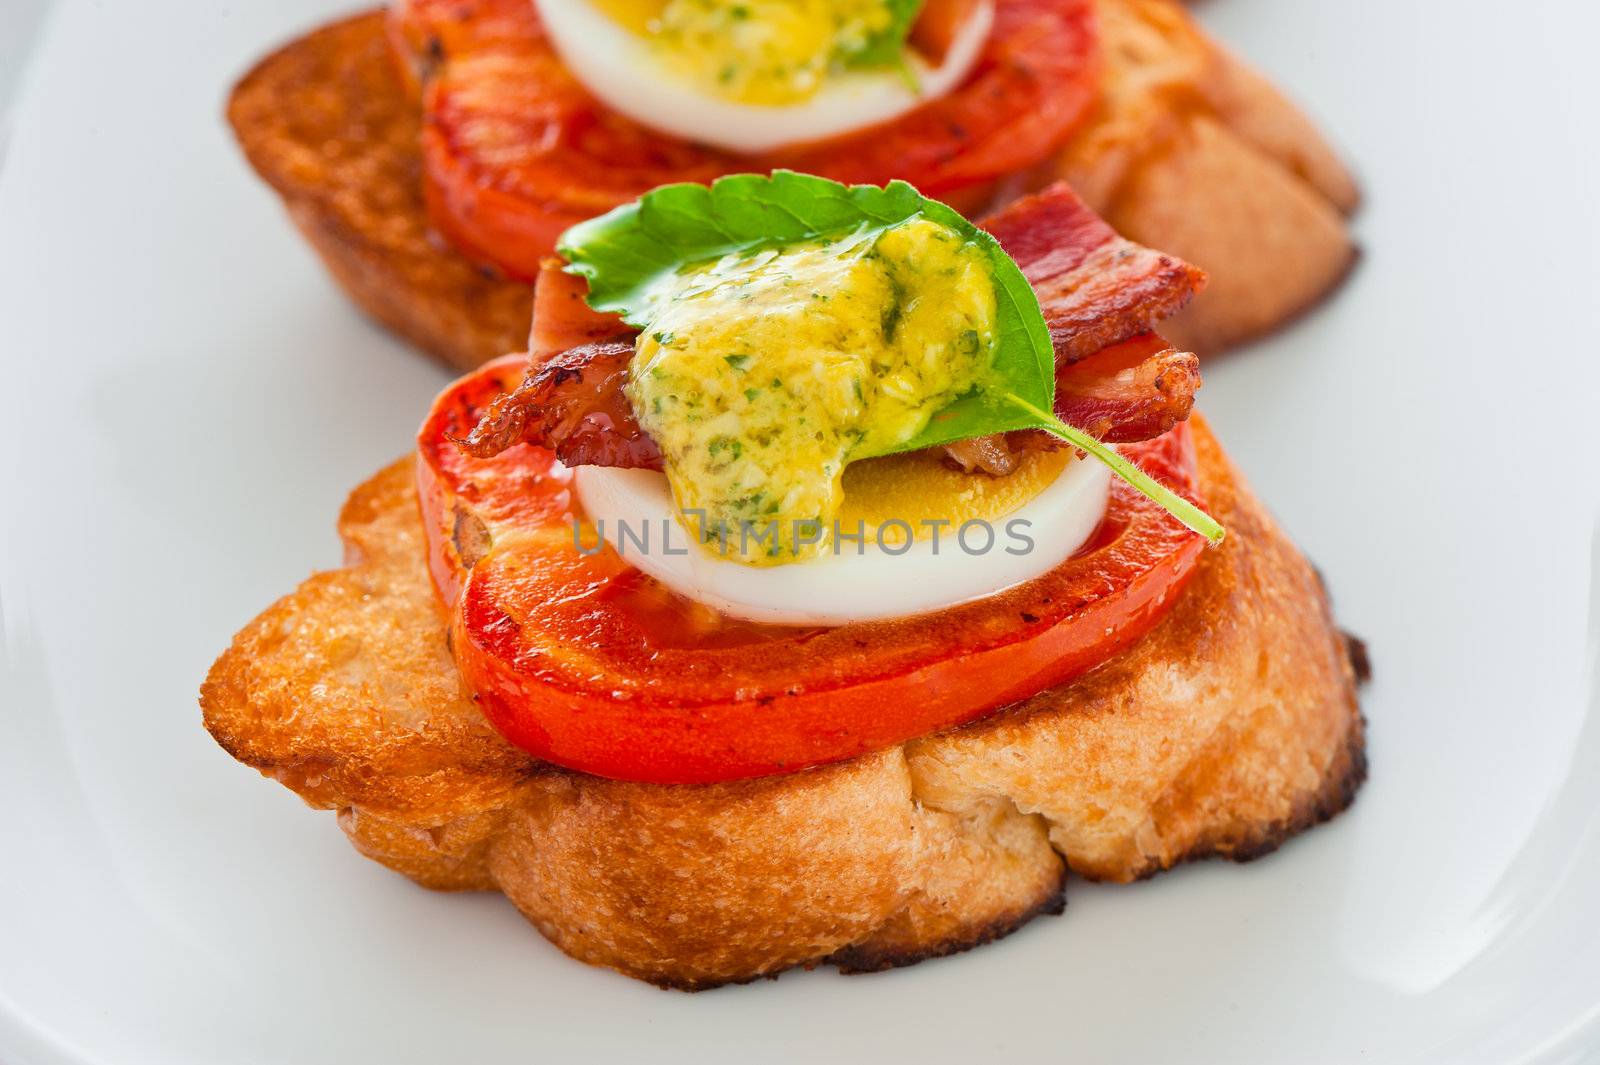 A baguette slice with tomato egg bacon and herb butter